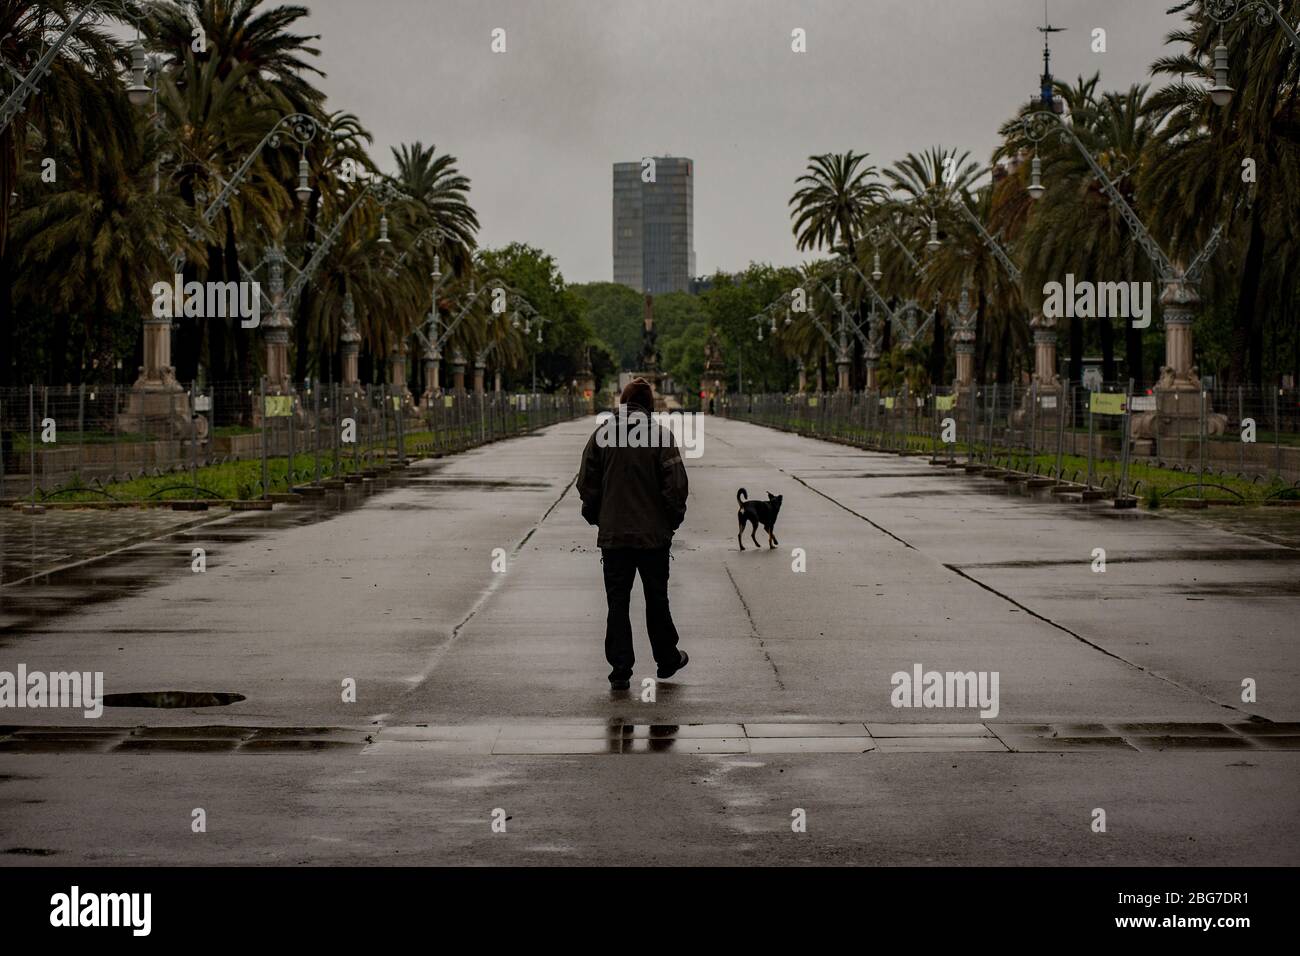 April 20, 2020, Barcelona, Catalonia, Spain - A man walks his dog under the rain by an empty avenue in Barcelona. Daily coronavirus deaths in Spain fall to 399, while confirmed cases now exceed 200,000. Credit:Jordi Boixareu/Alamy Live News Stock Photo